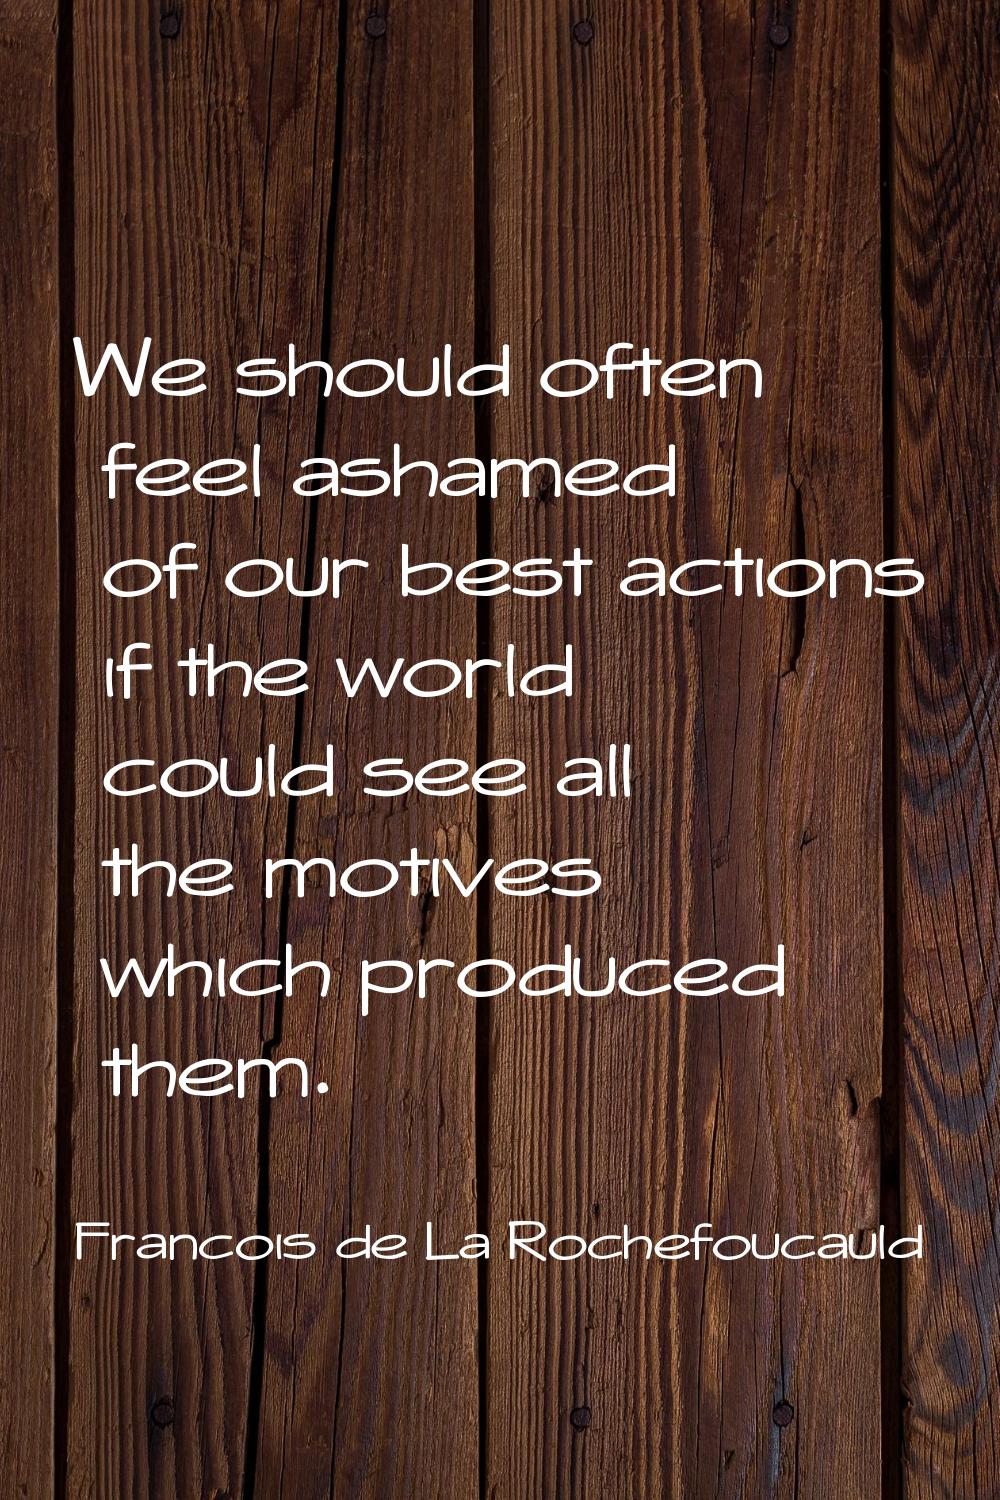 We should often feel ashamed of our best actions if the world could see all the motives which produ